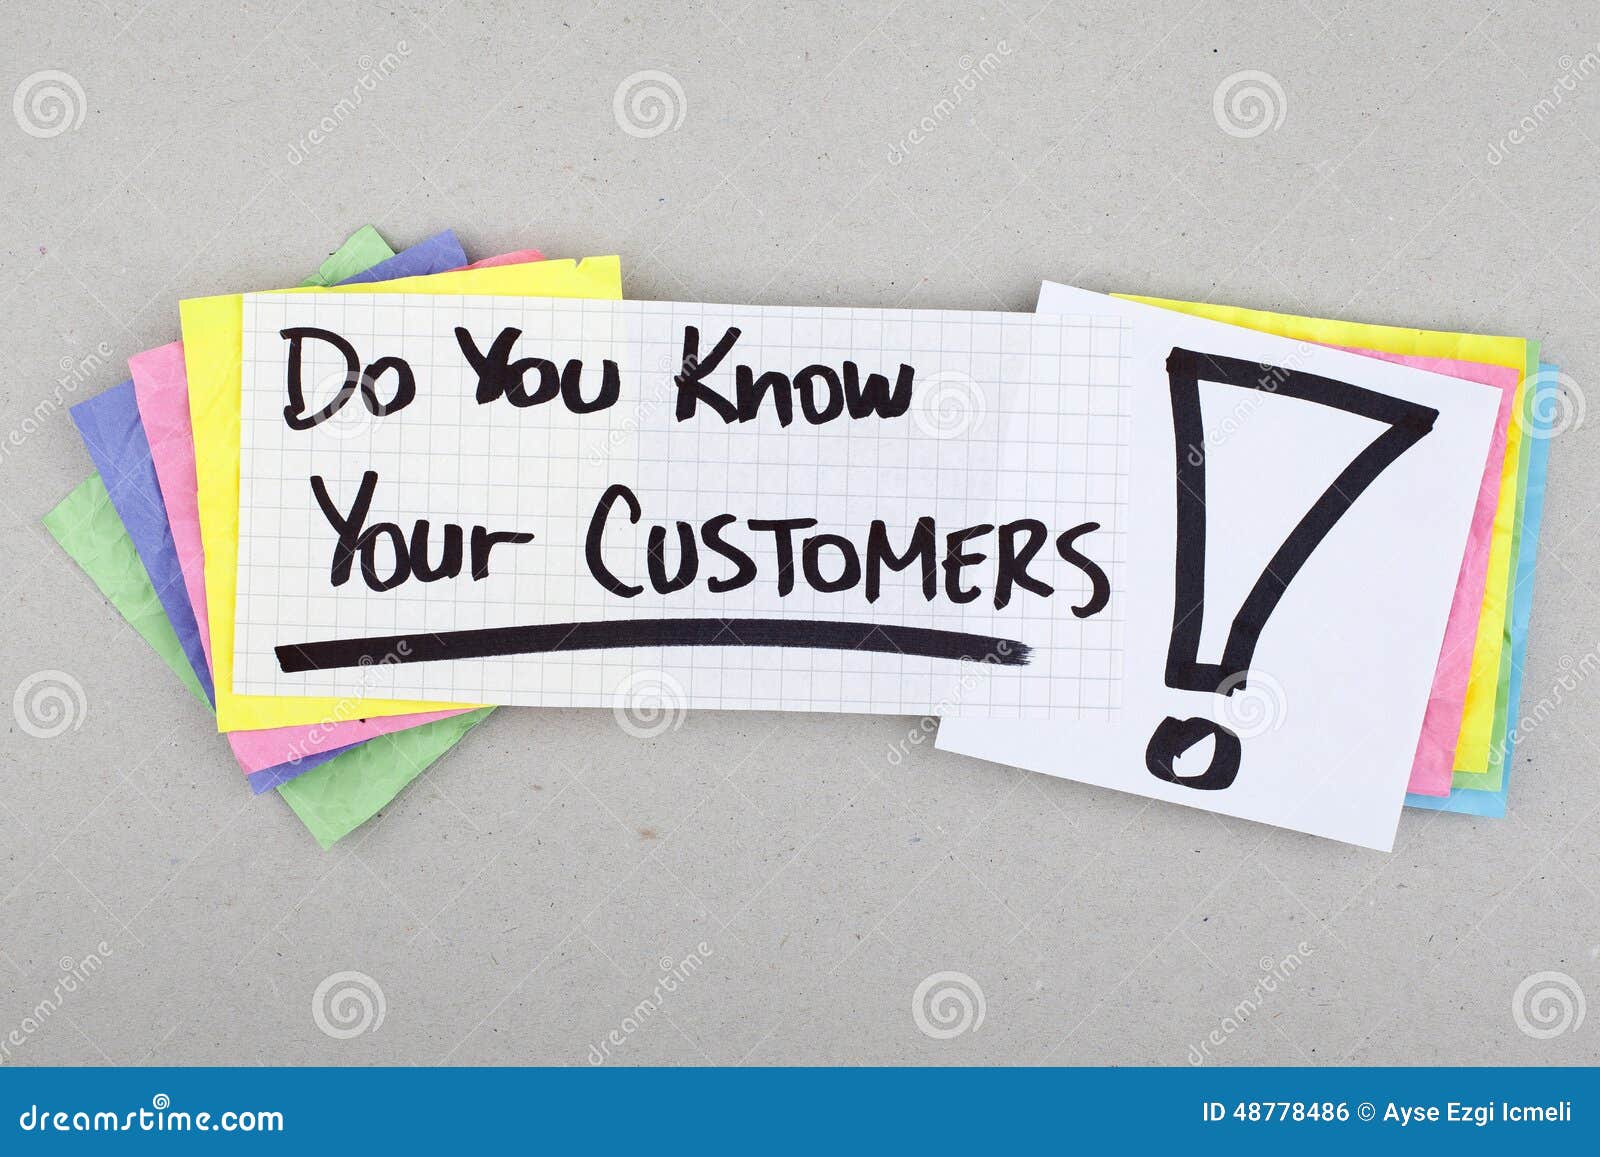 do you know your customers